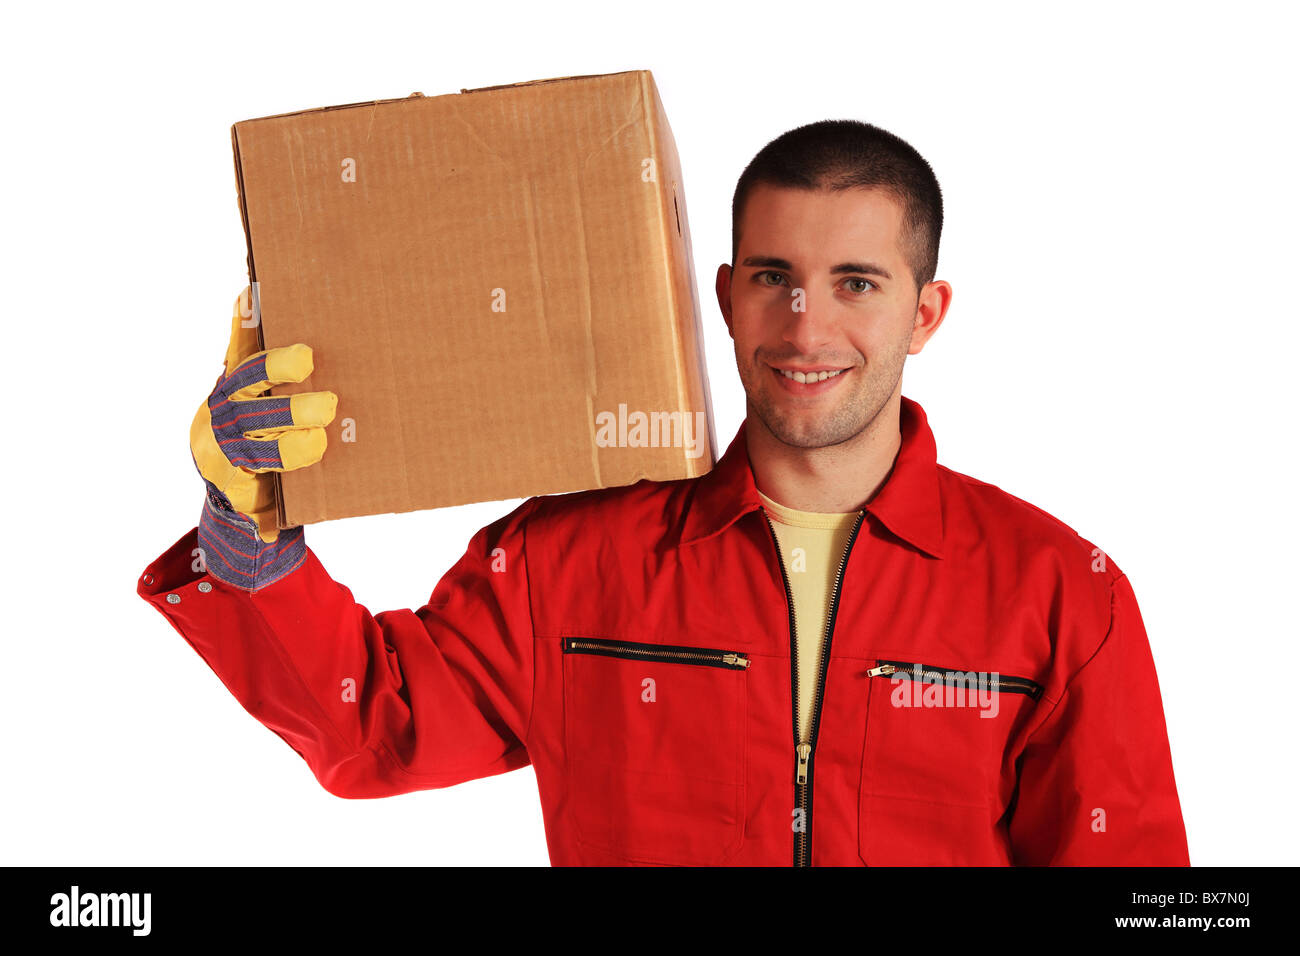 Motivated worker of an moving company in red overall. All on white background. Stock Photo